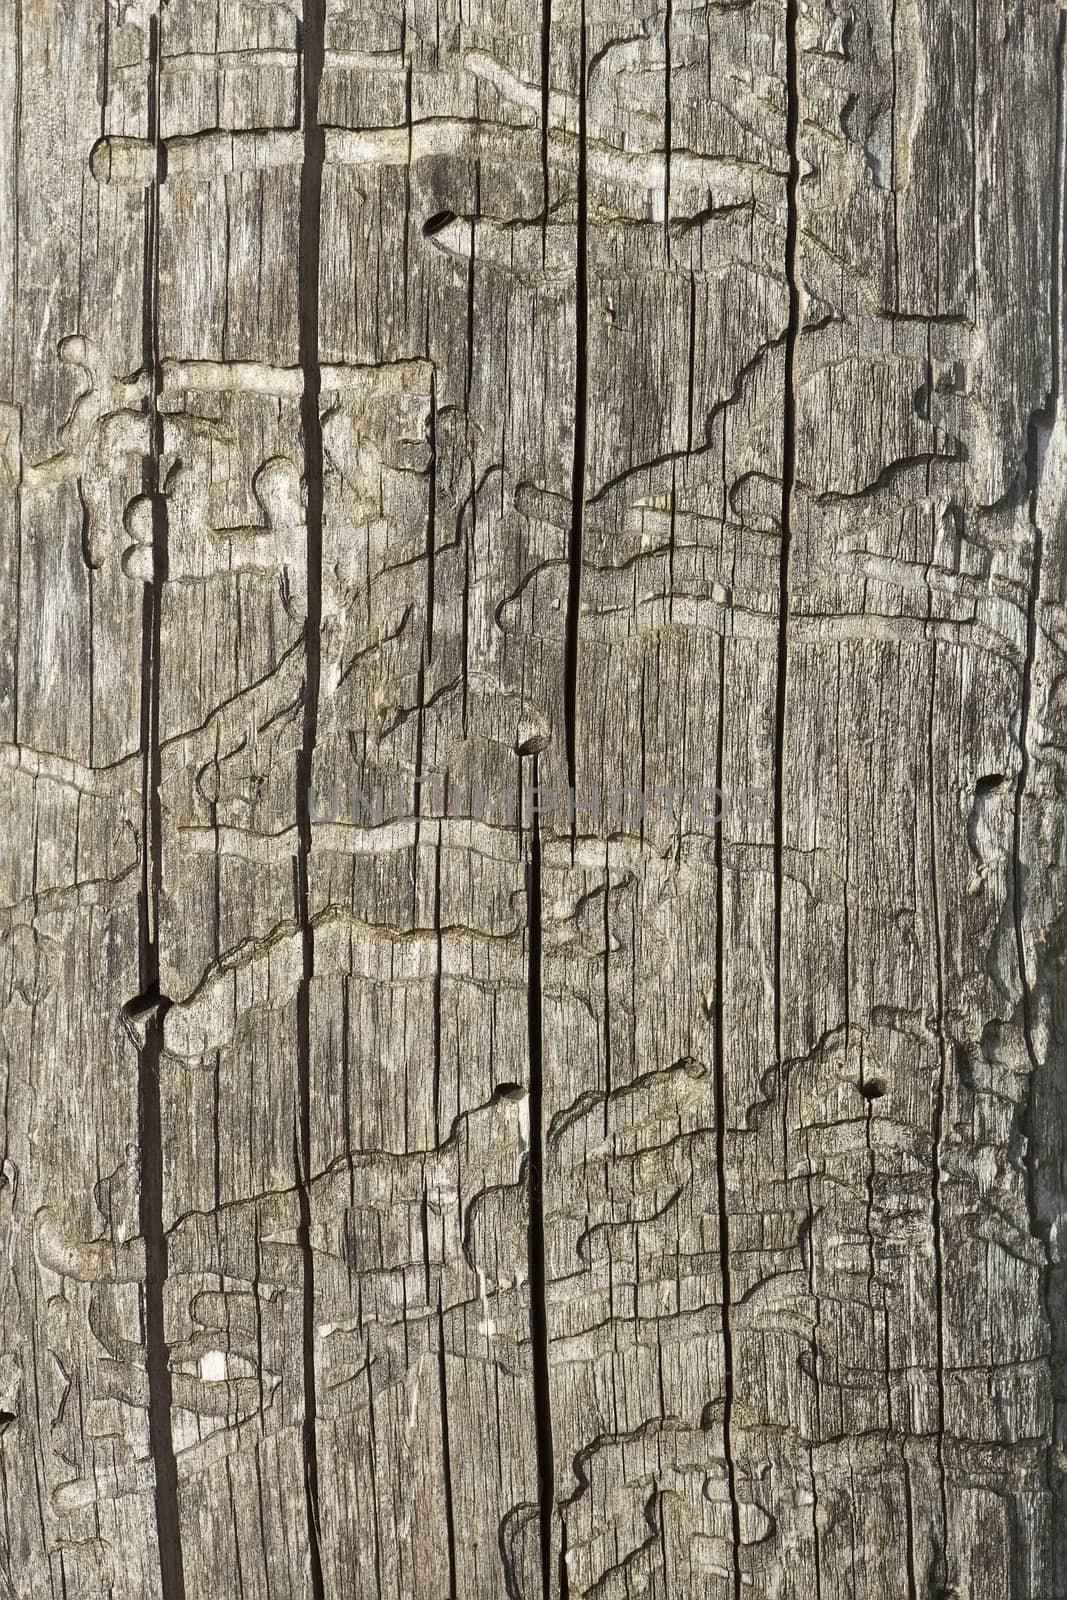 Detail of old wooden logs with bark beetles damaged surface